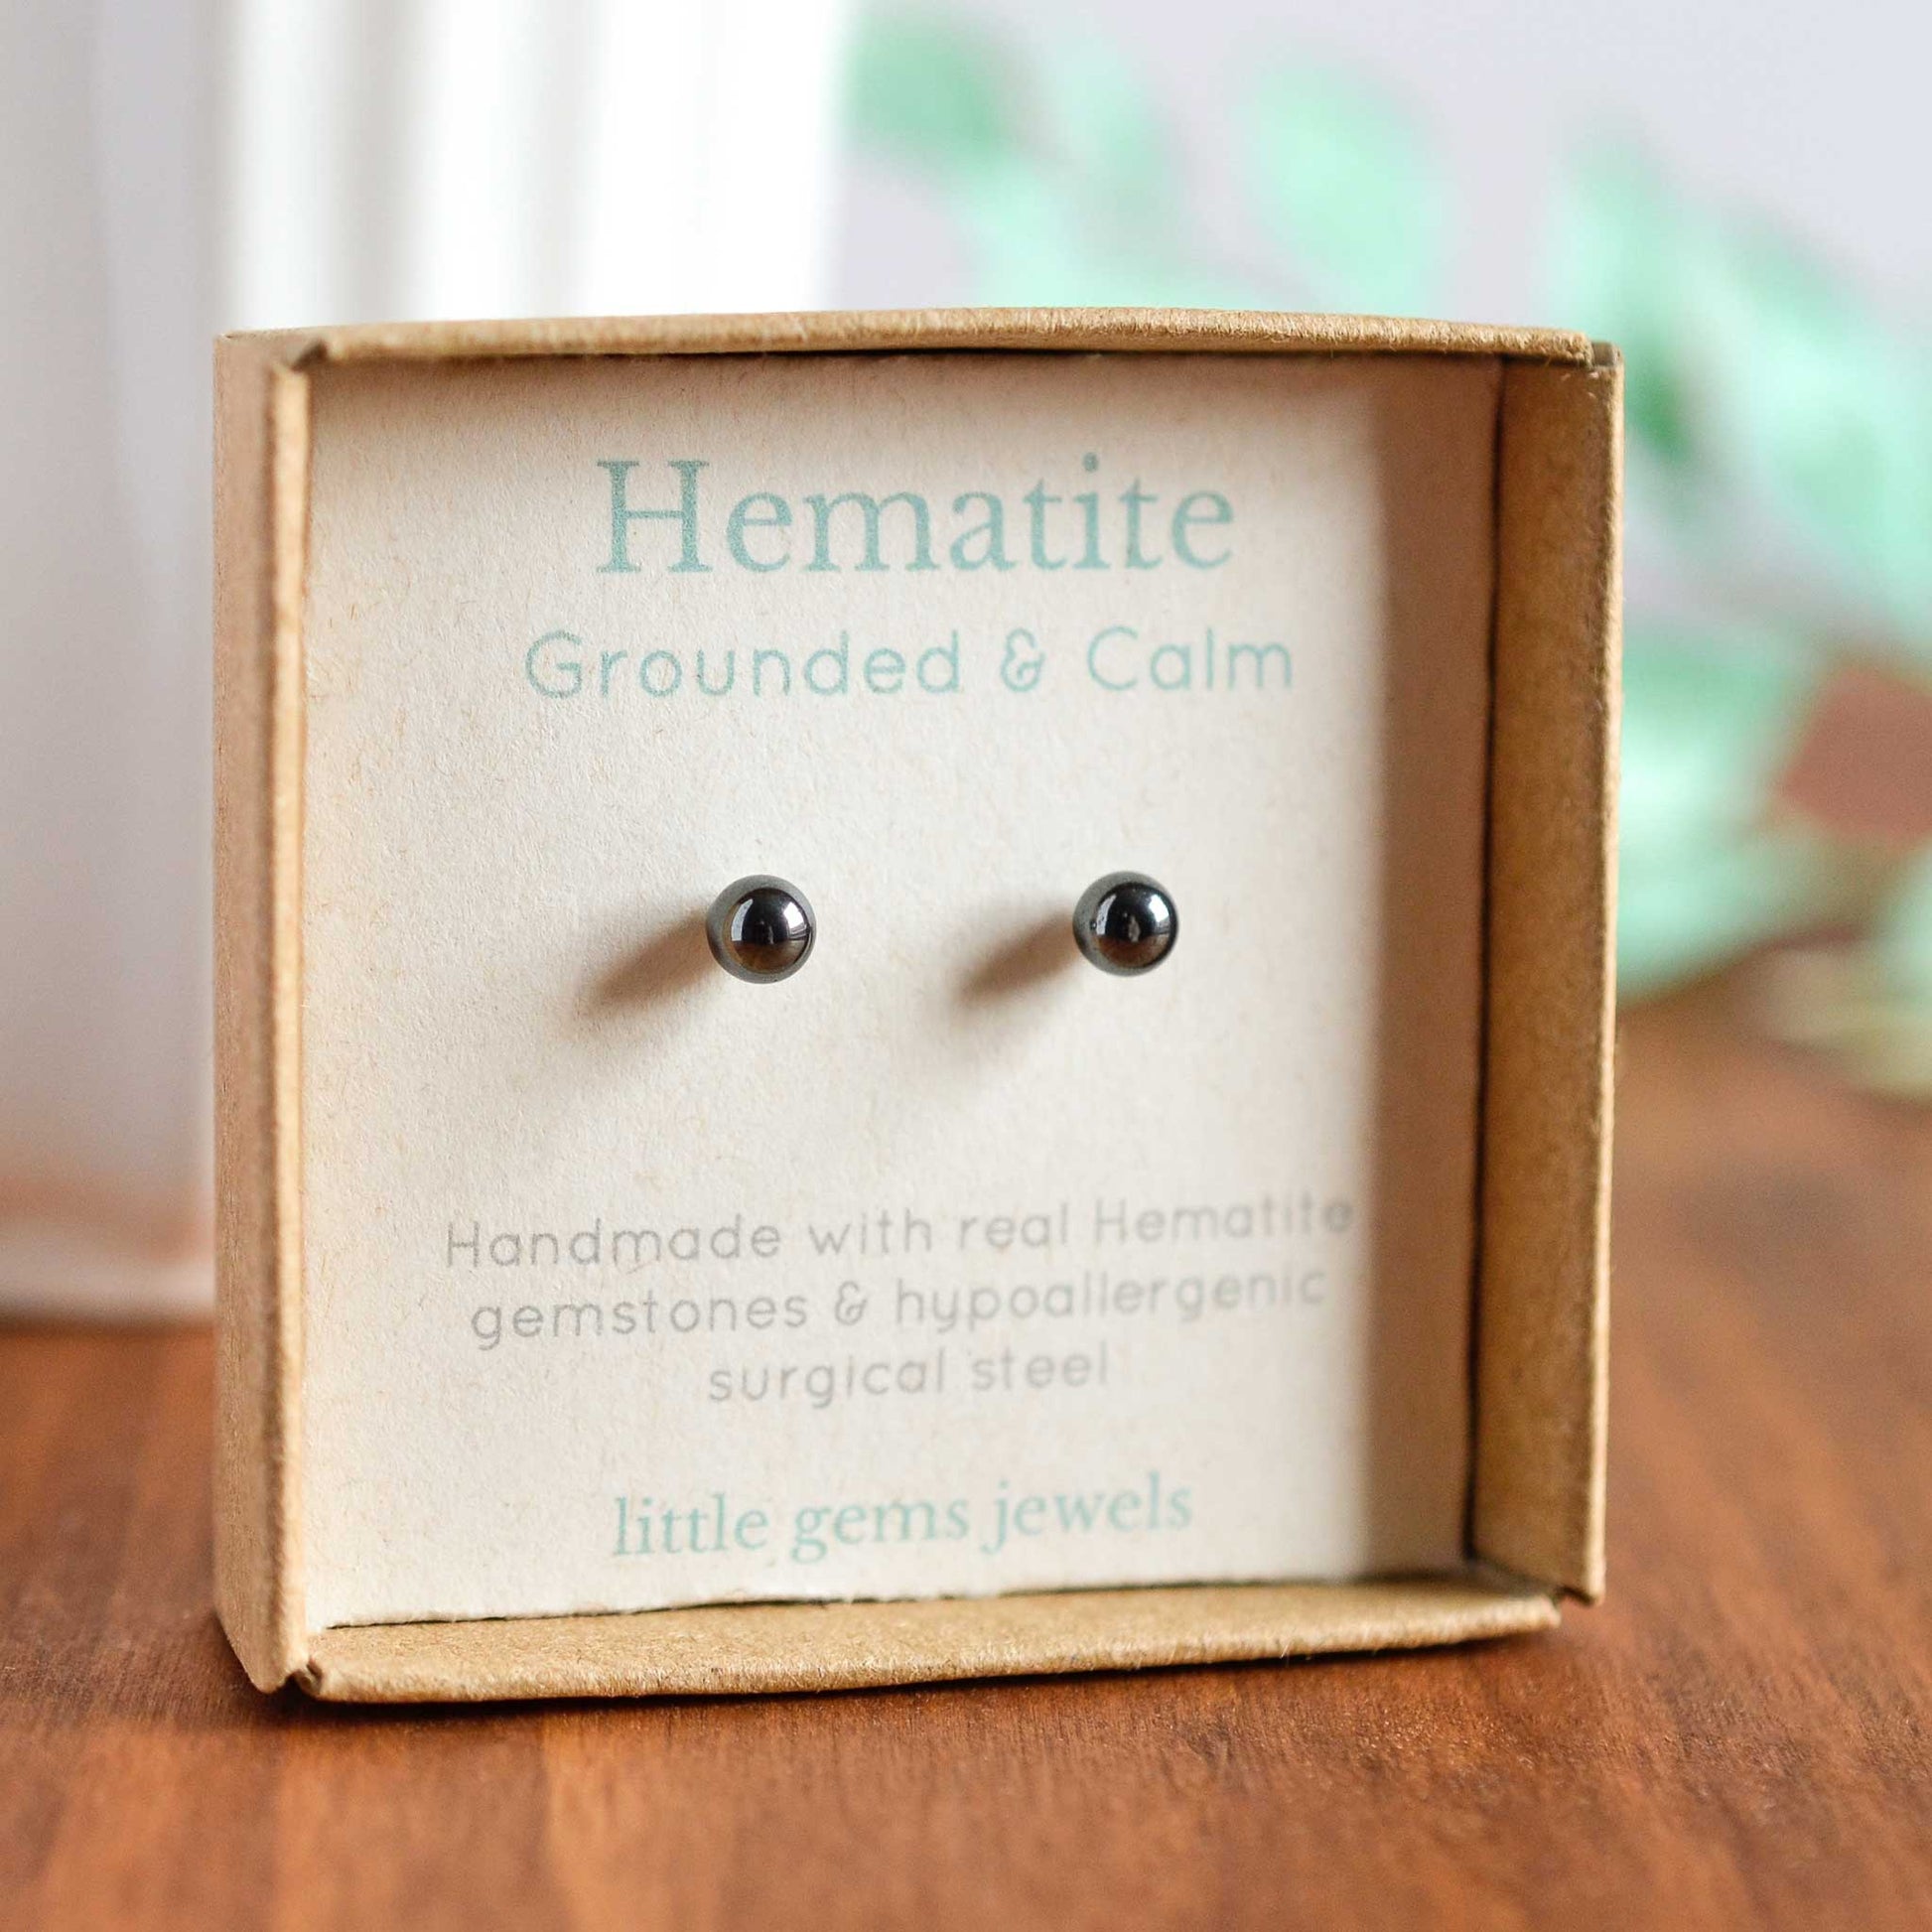 Hematite for grounding and calm gemstone stud earrings in eco friendly gift box